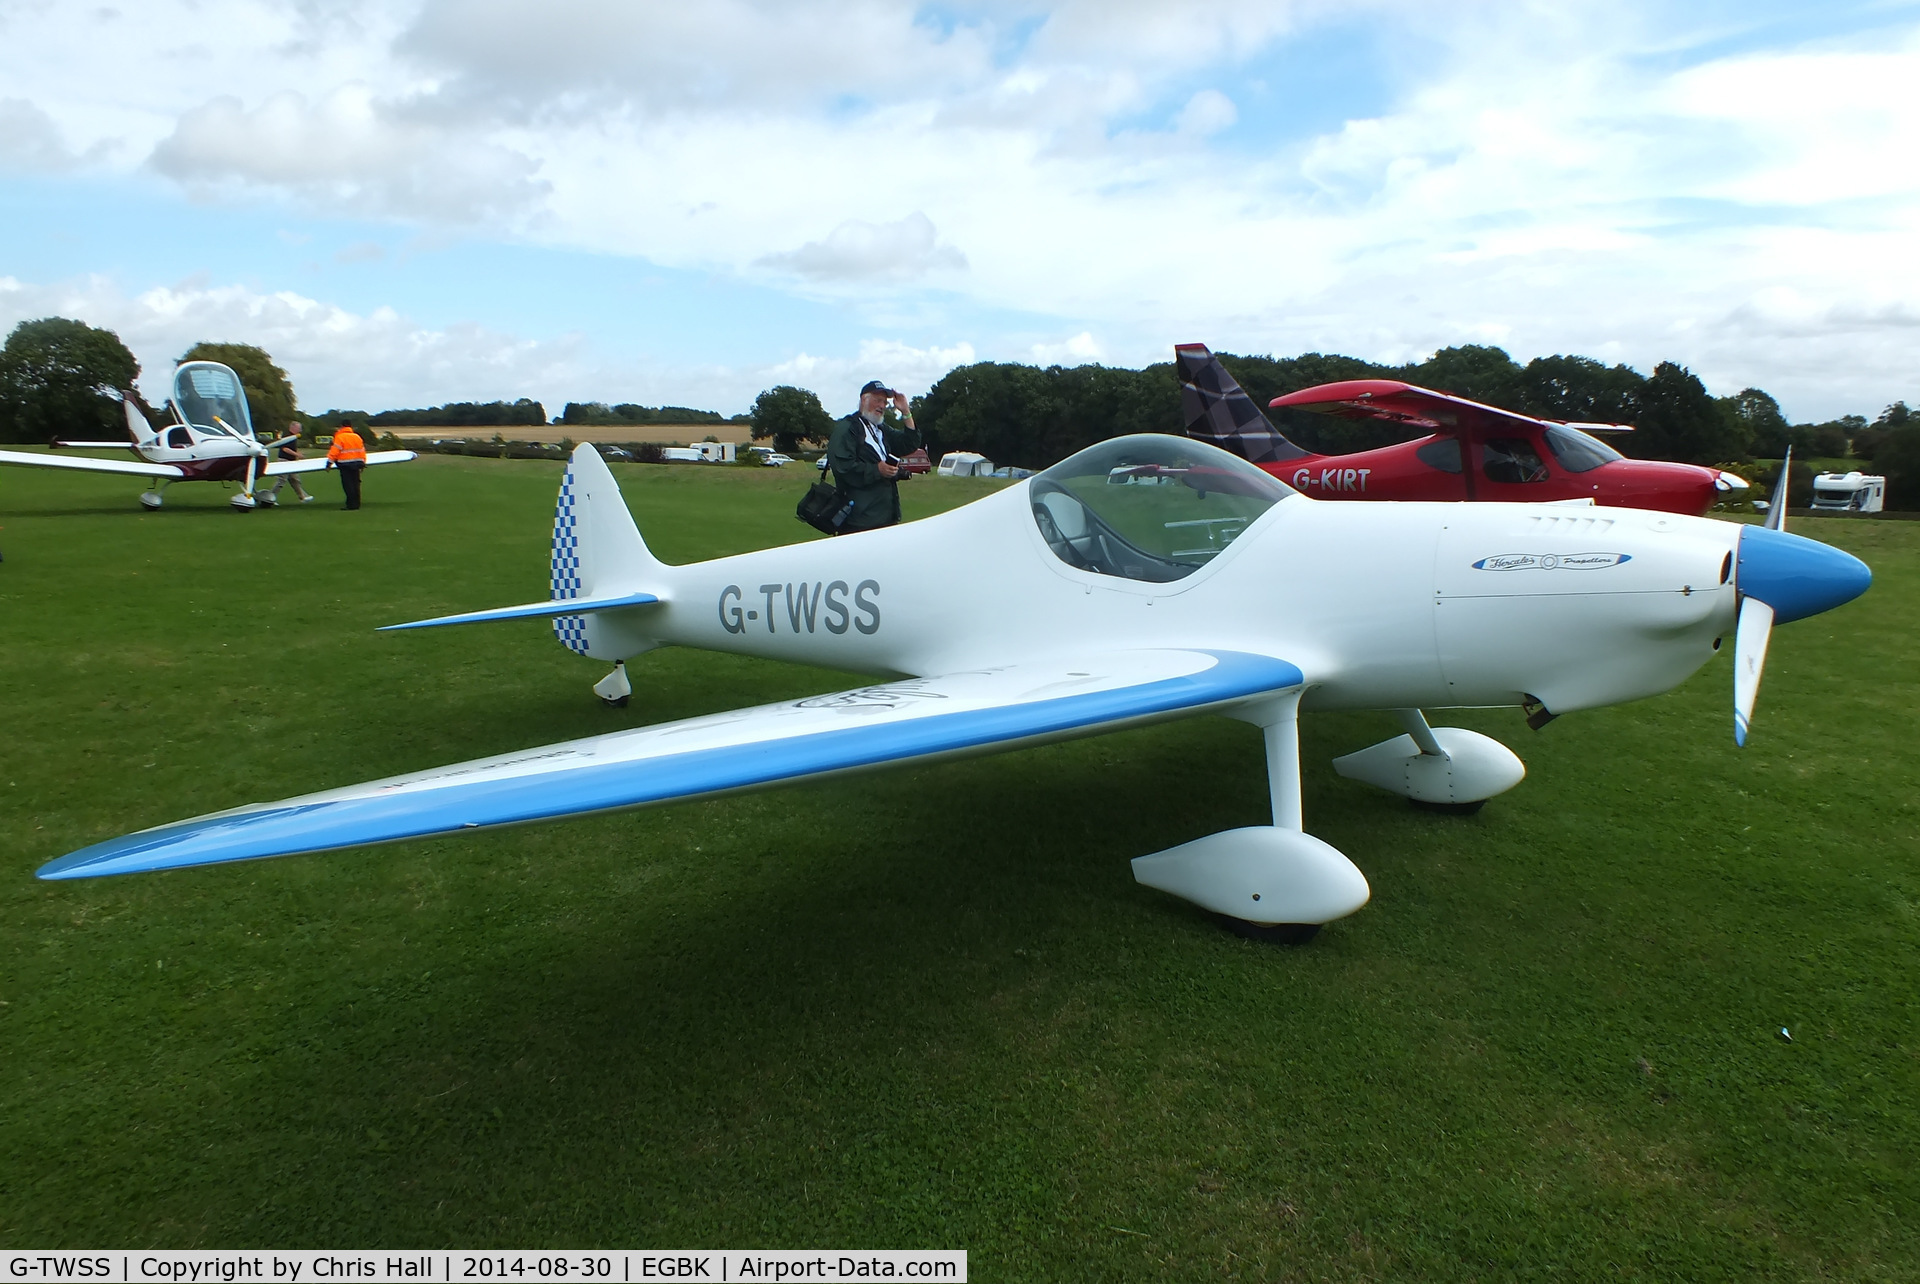 G-TWSS, 2008 Silence Twister C/N PFA 329-14608, at the LAA Rally 2014, Sywell